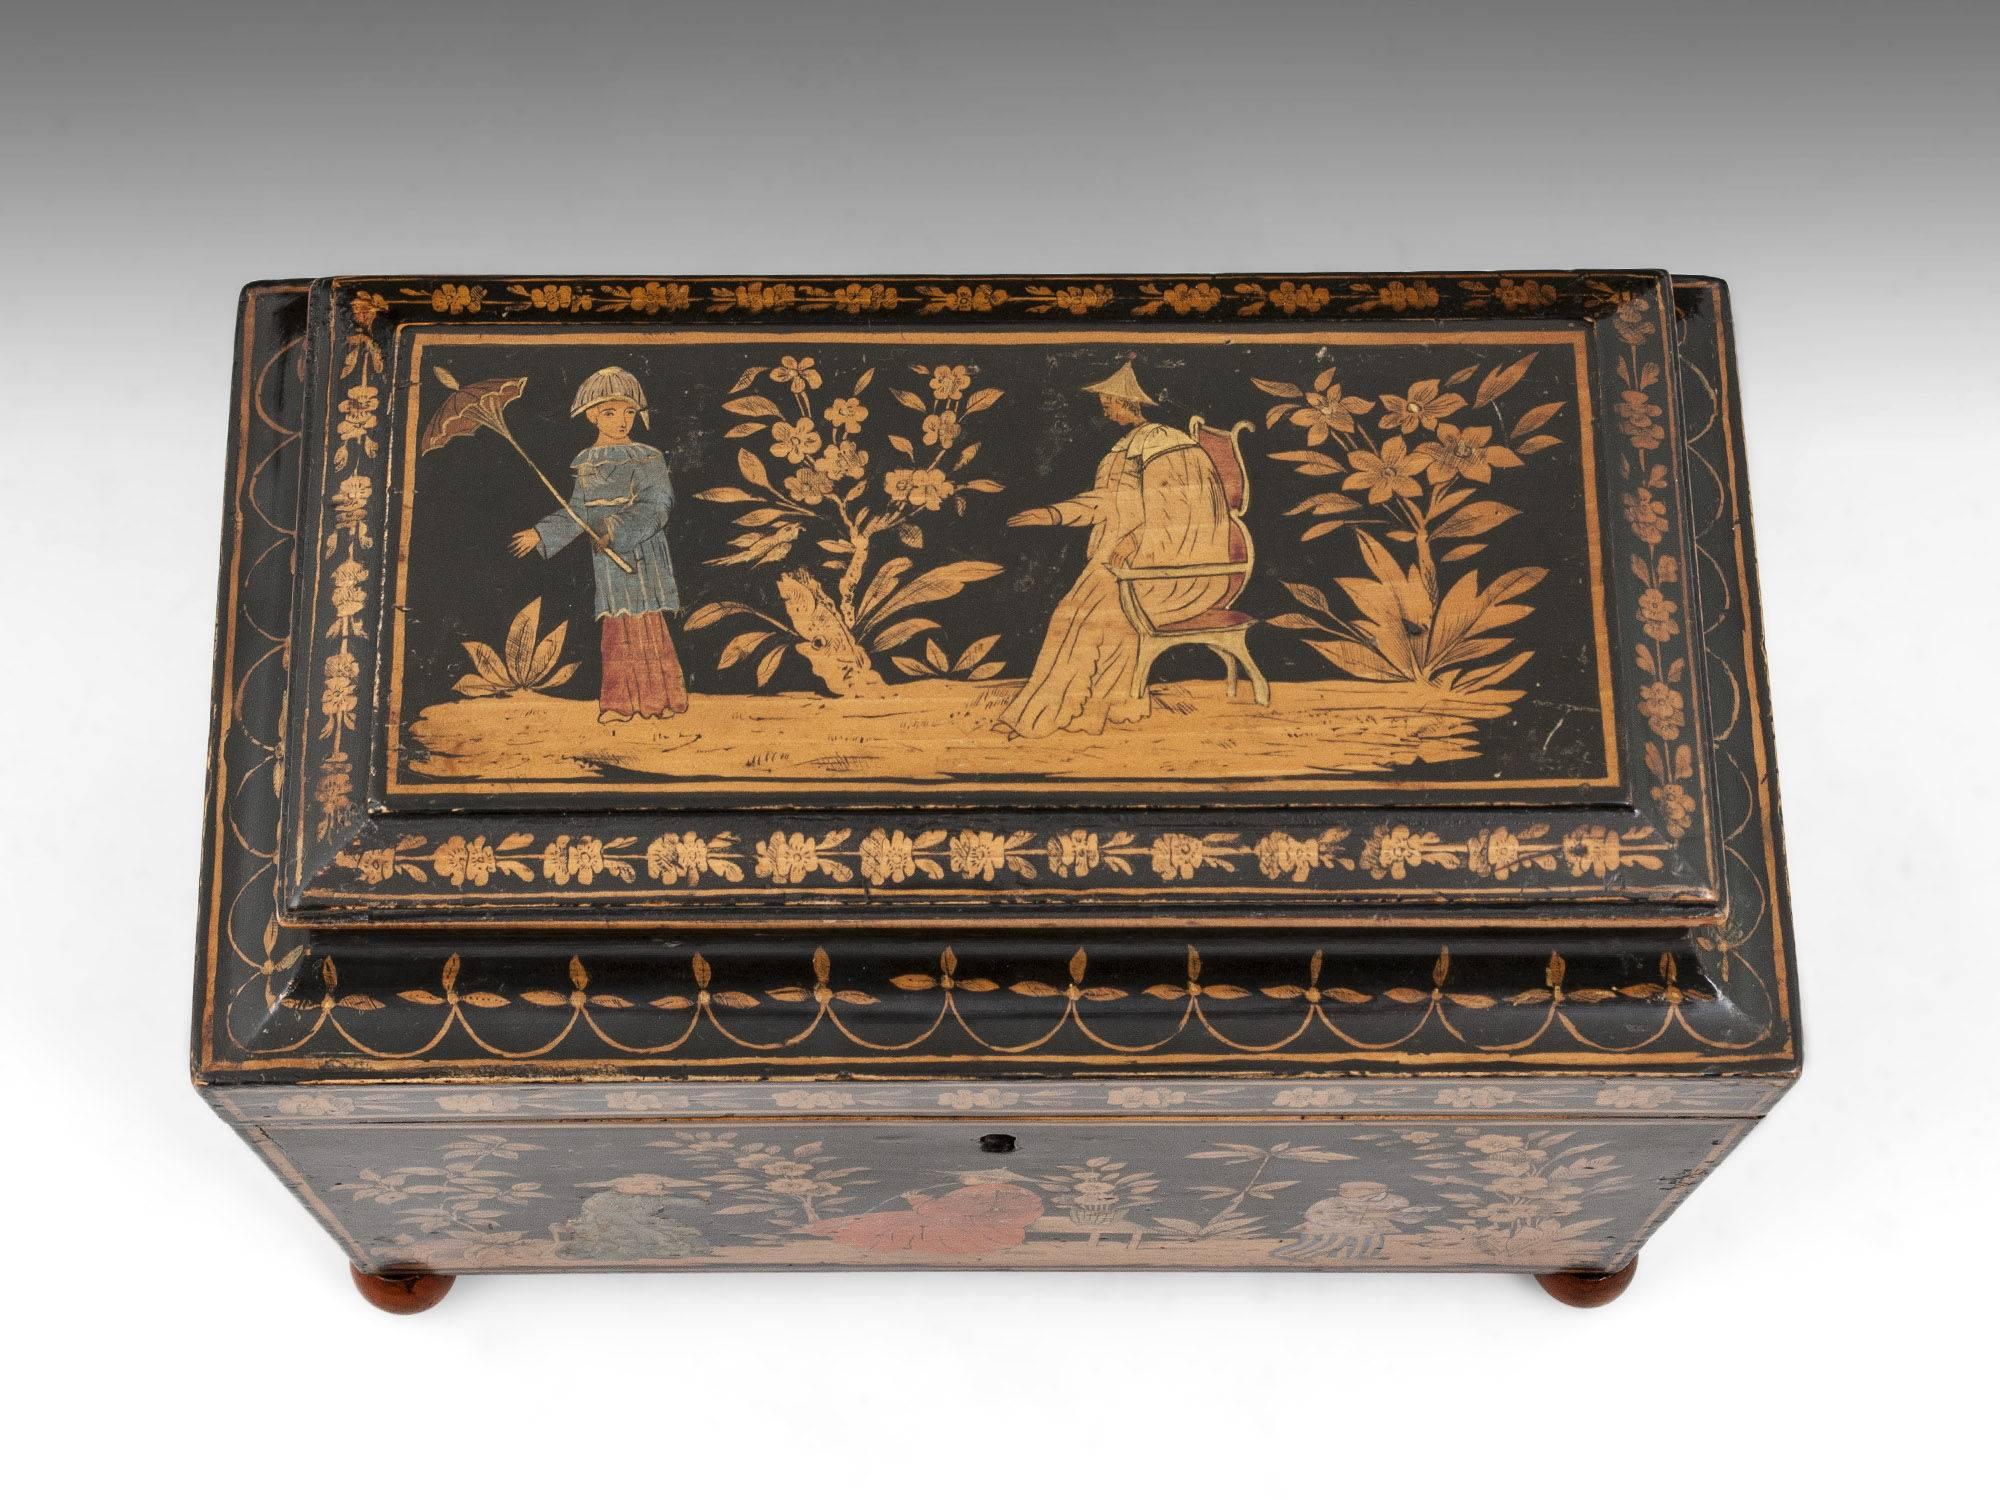 The tea caddy is painted and decorated on the top, front, back and sides with figures working amongst trees, birds and flowers. The lid opens to reveal two penwork painted lids above two compartments. The tea caddy is in its original condition and